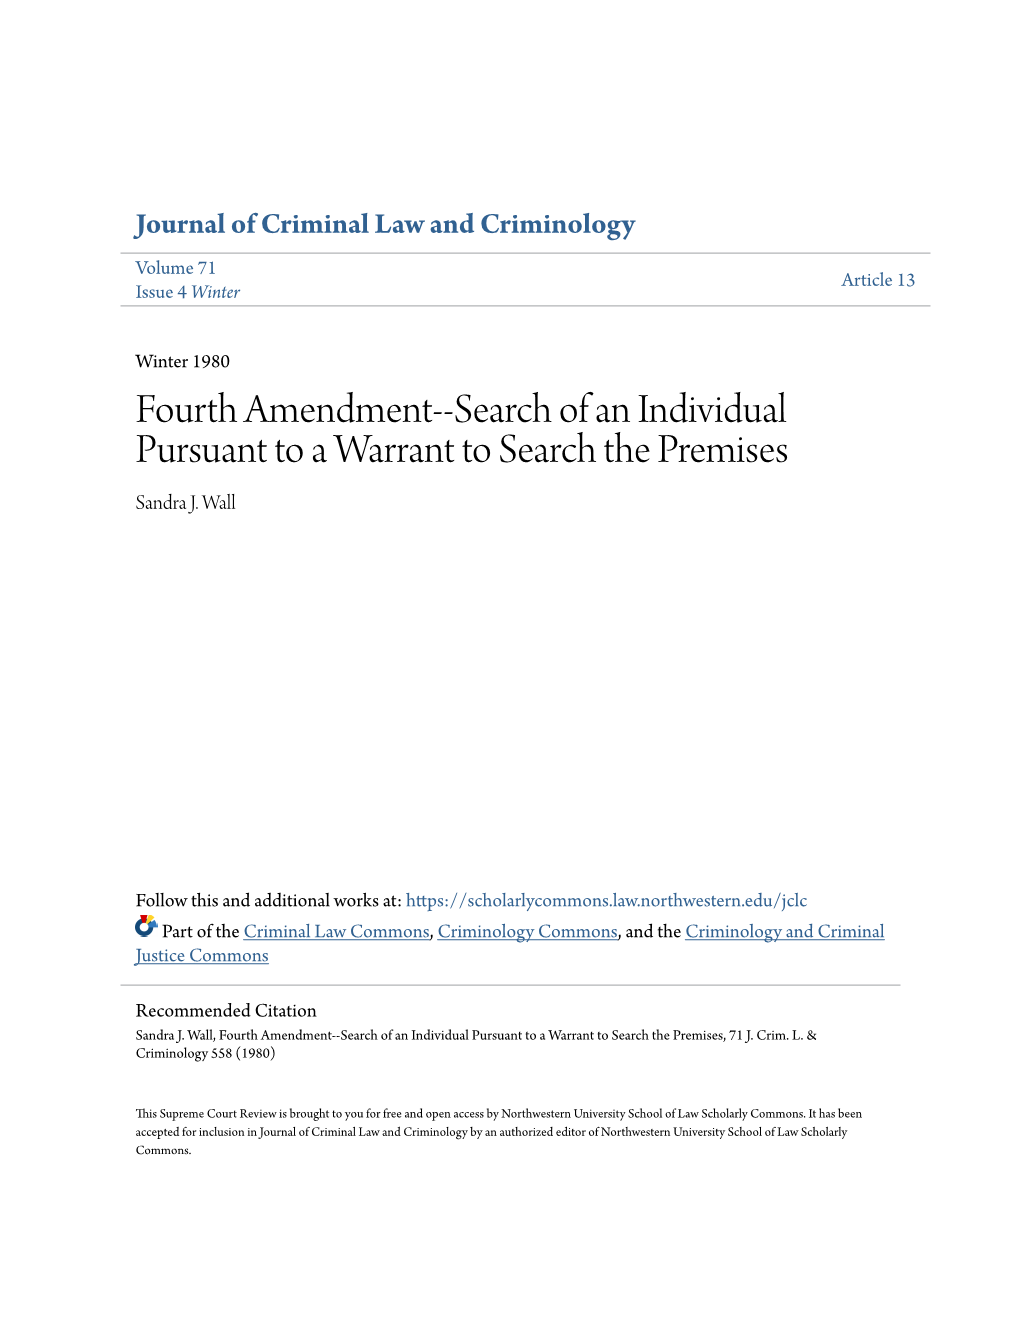 Fourth Amendment--Search of an Individual Pursuant to a Warrant to Search the Premises Sandra J